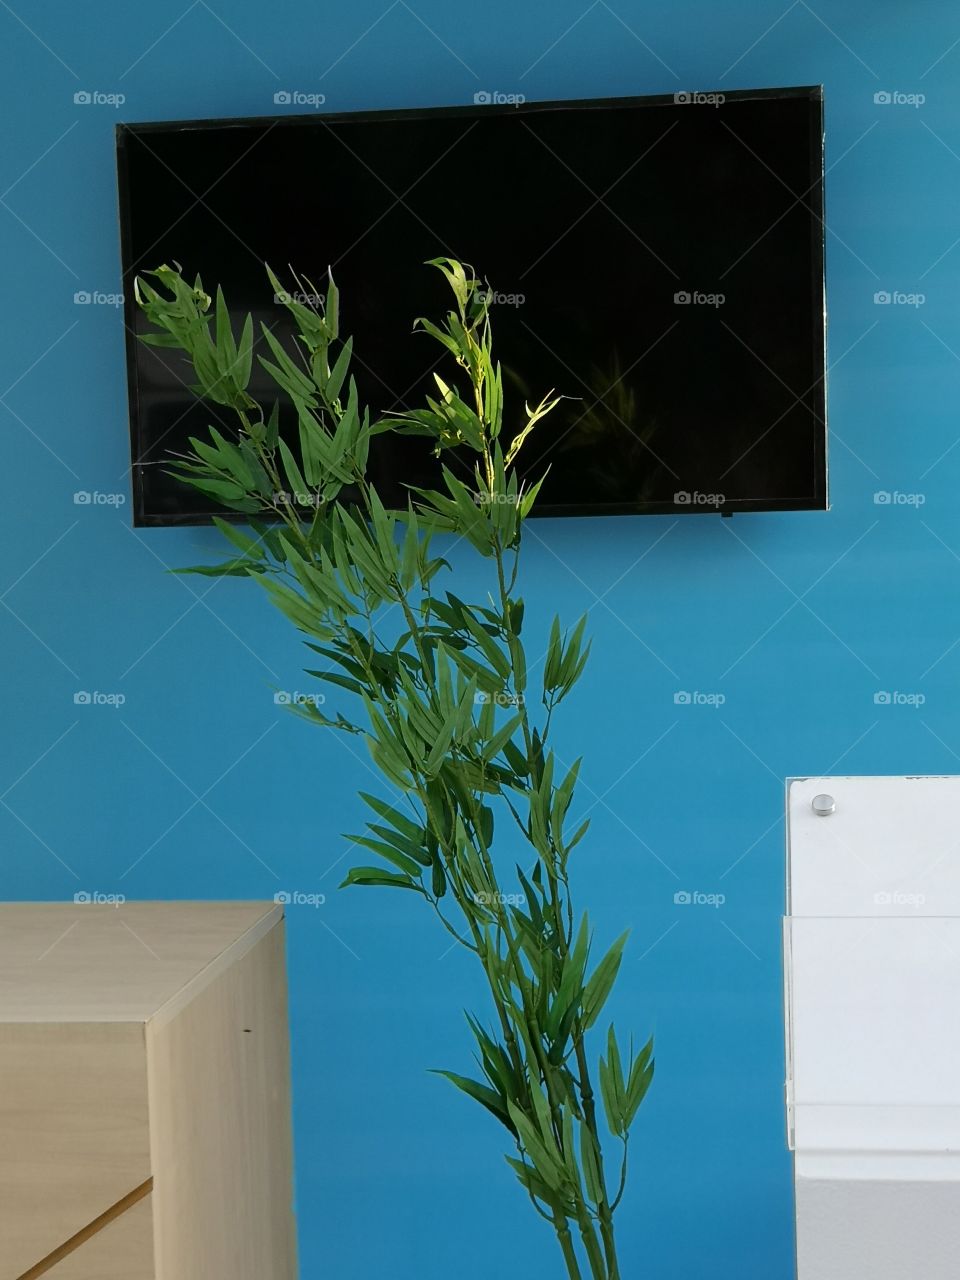 TV and plant